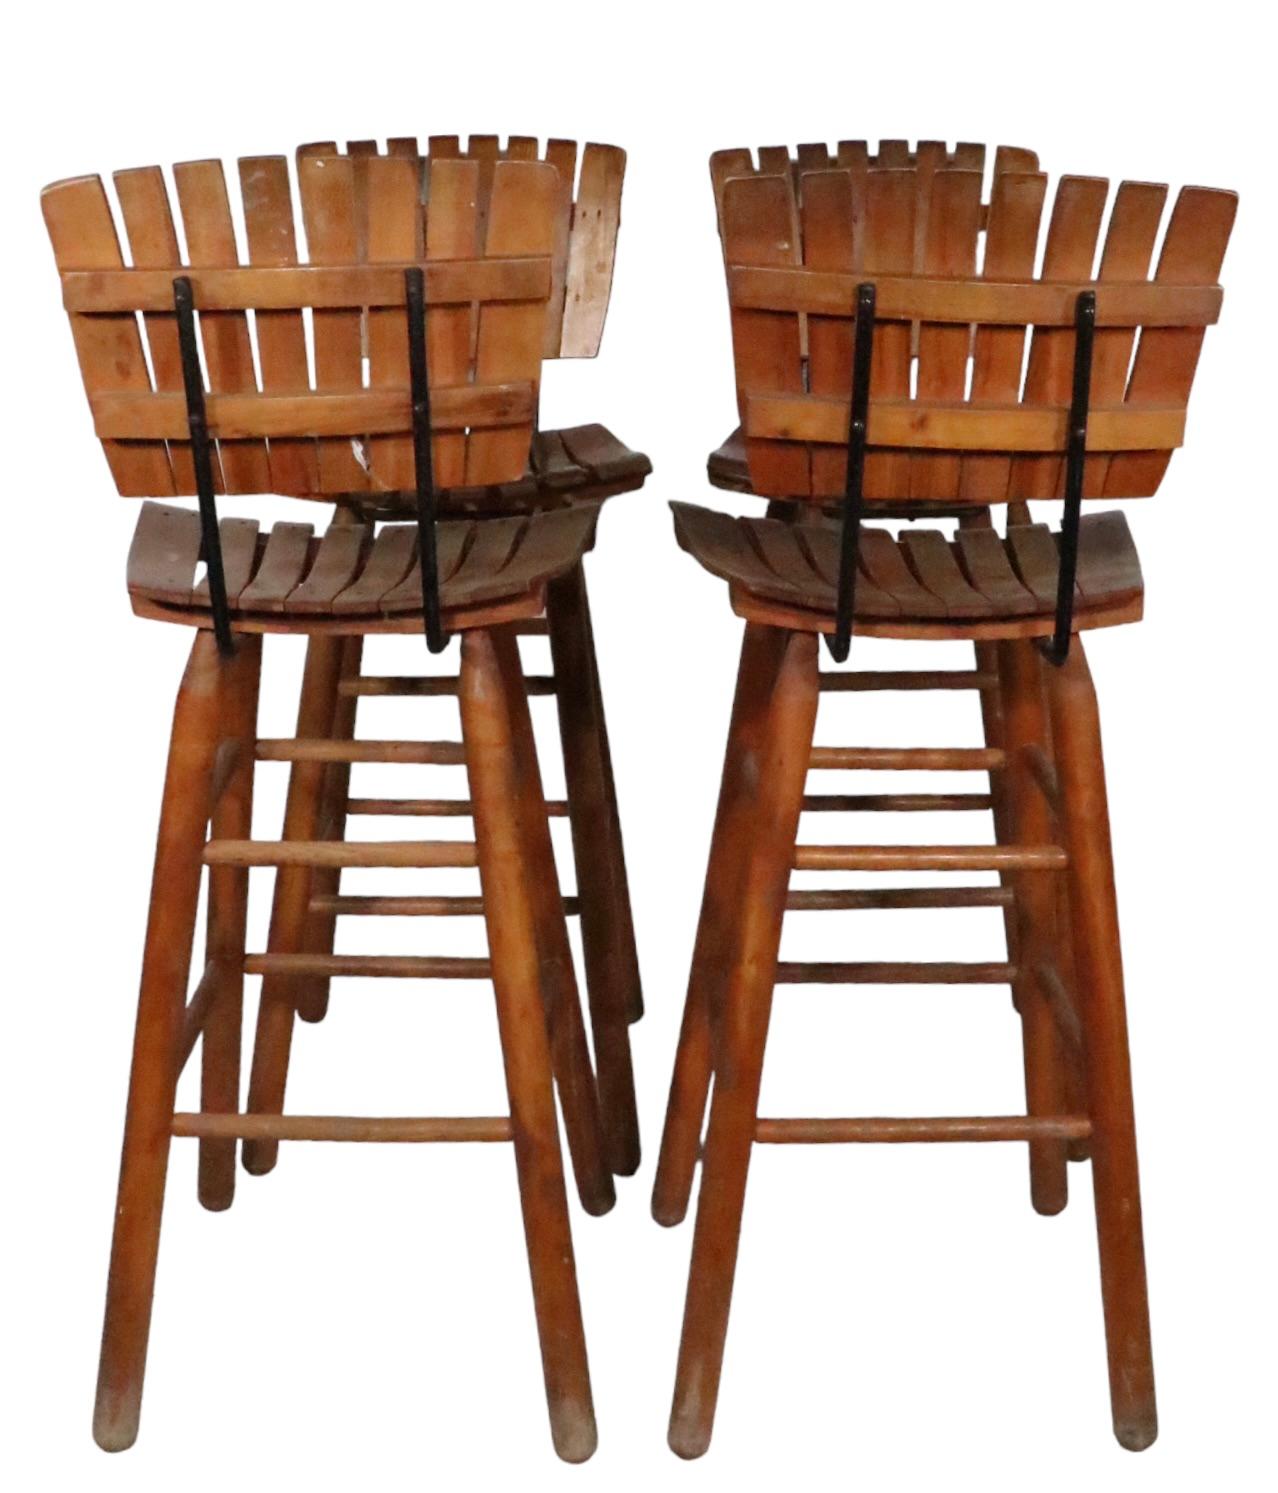 Unusual set off bar height stools designed by Arthur Umanoff, circa 1950's. The stools feature slatted backs and seats with solid wrought iron frames, on dowel form legs with exposed stretchers. All four are structurally sound and sturdy, all show